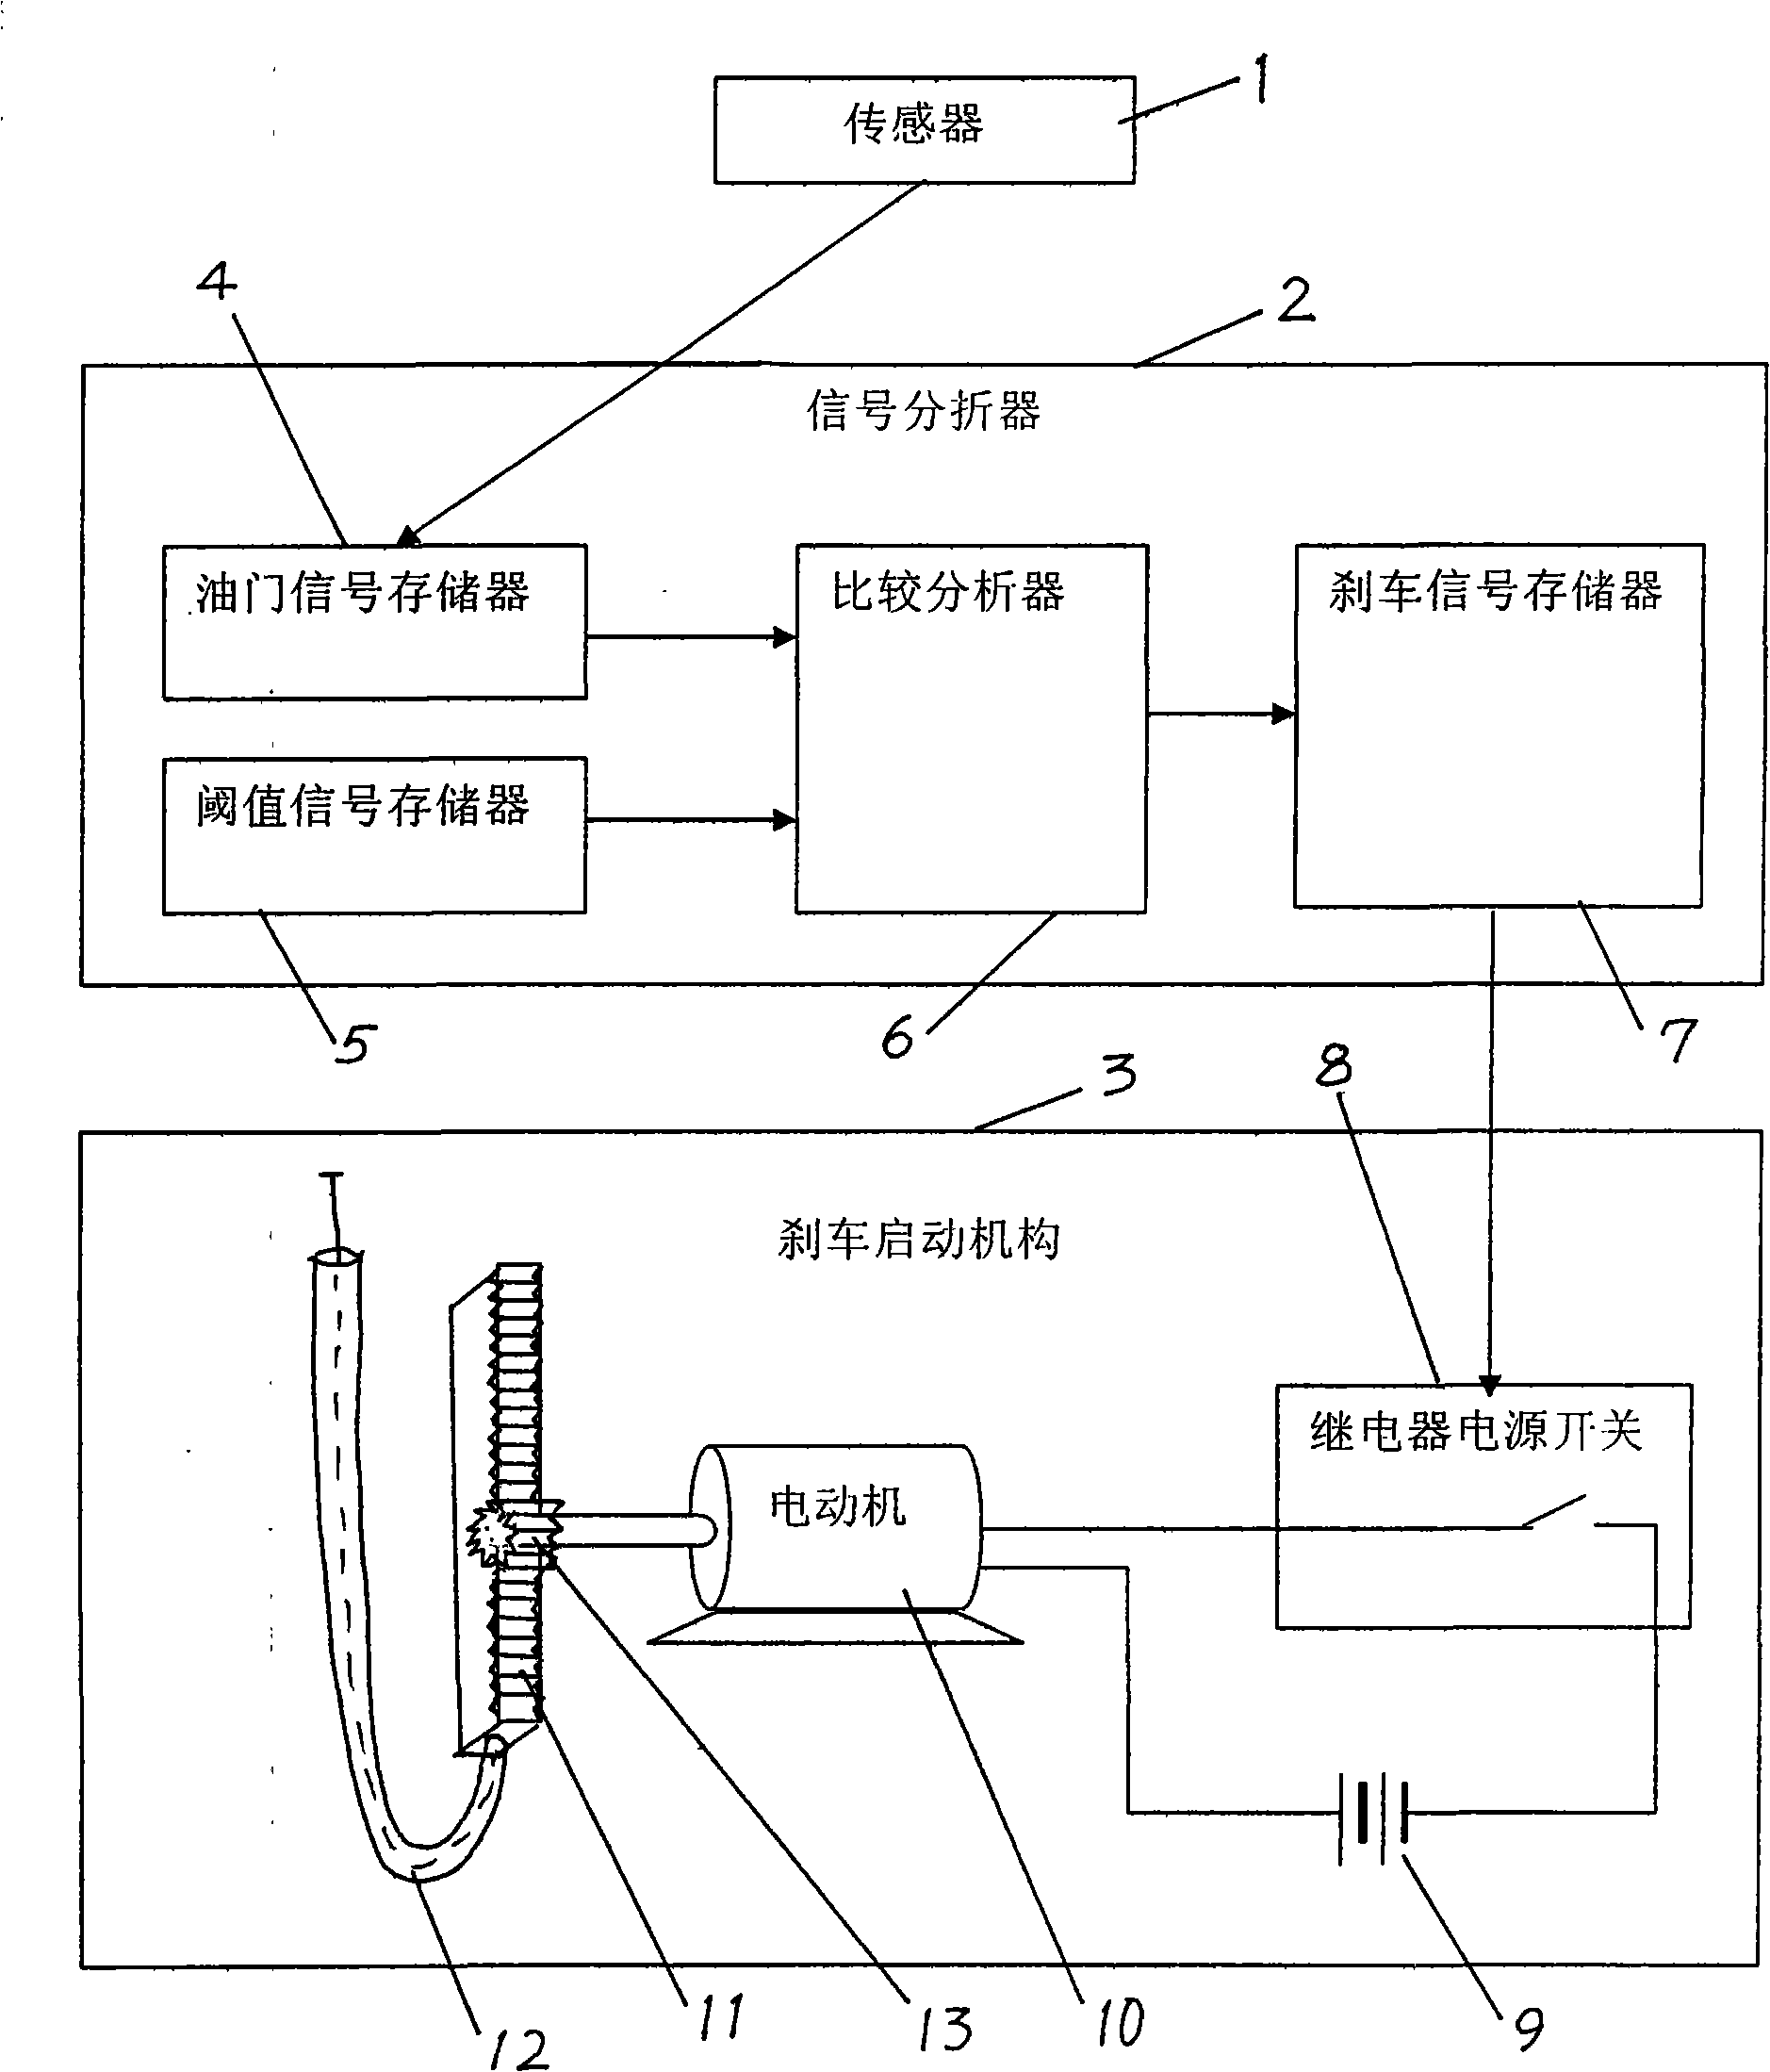 Device for automatically correcting accelerator pedal misoperation to braking operation by electrical and mechanical combination